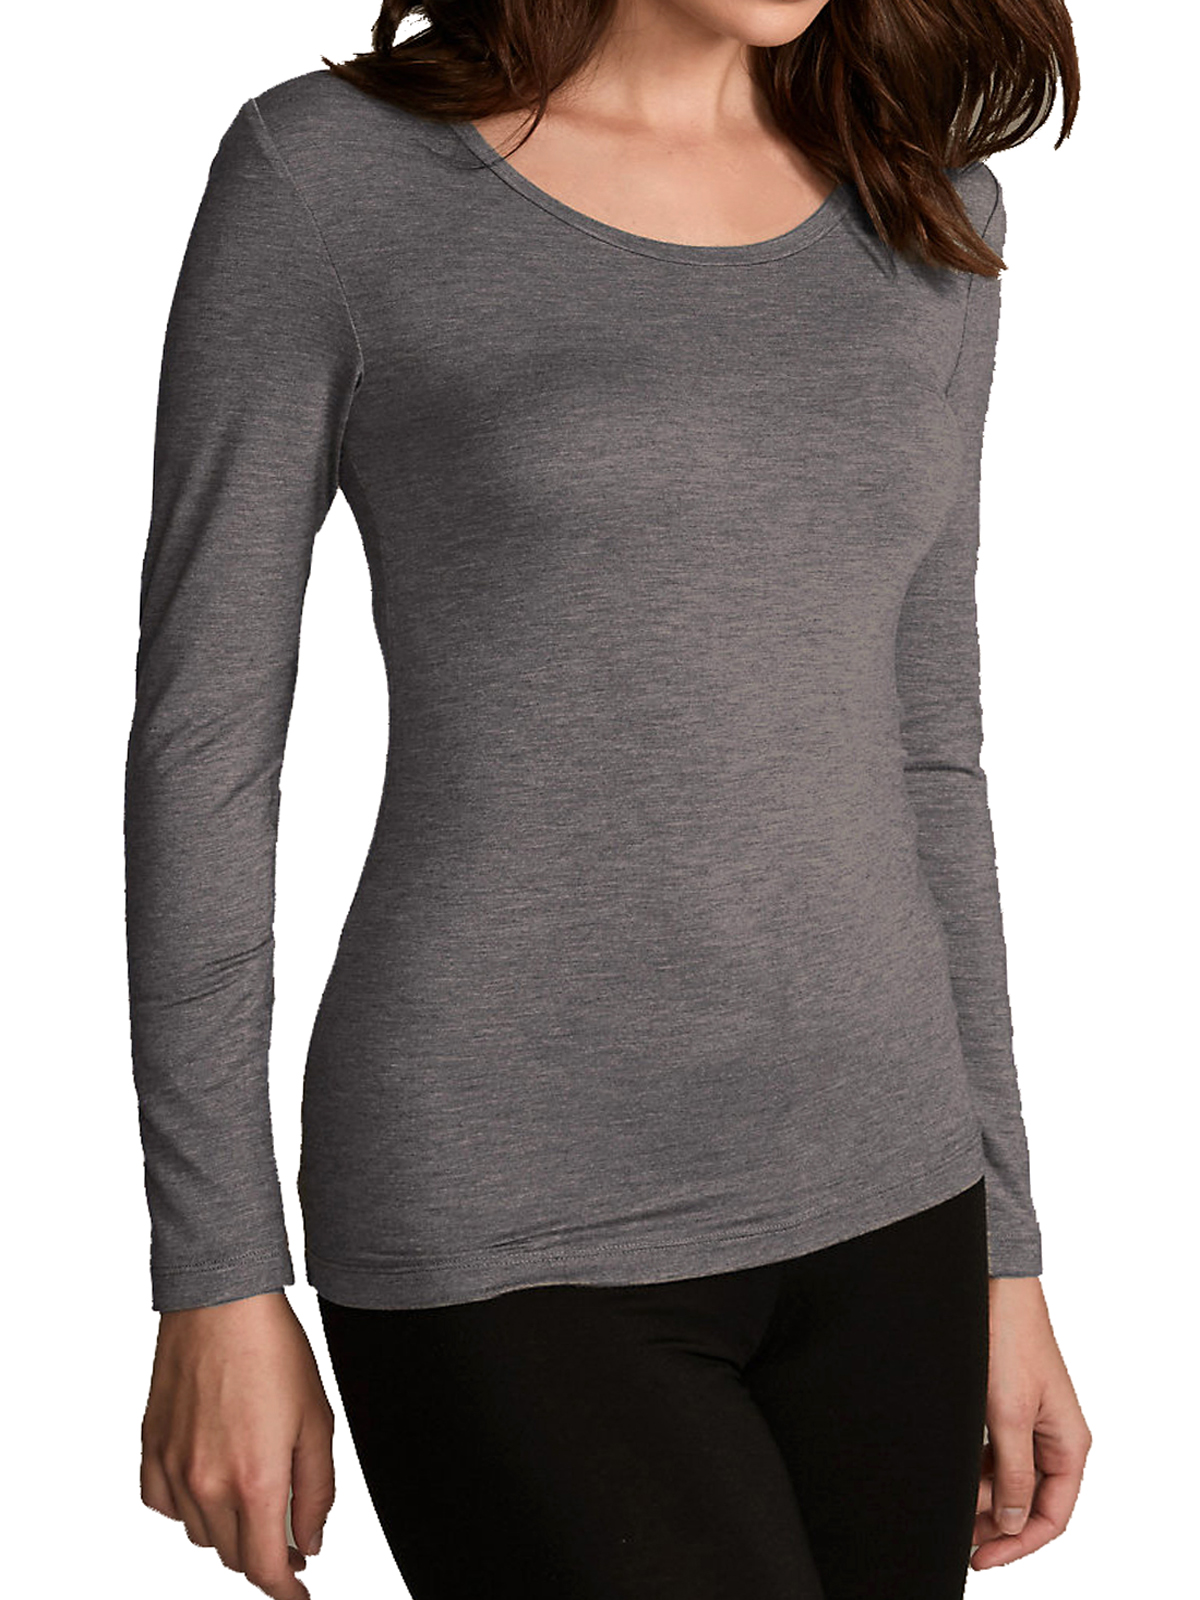 Marks and Spencer - - M&5 GREY-MARL Heatgen Thermal Long Sleeve Top ...